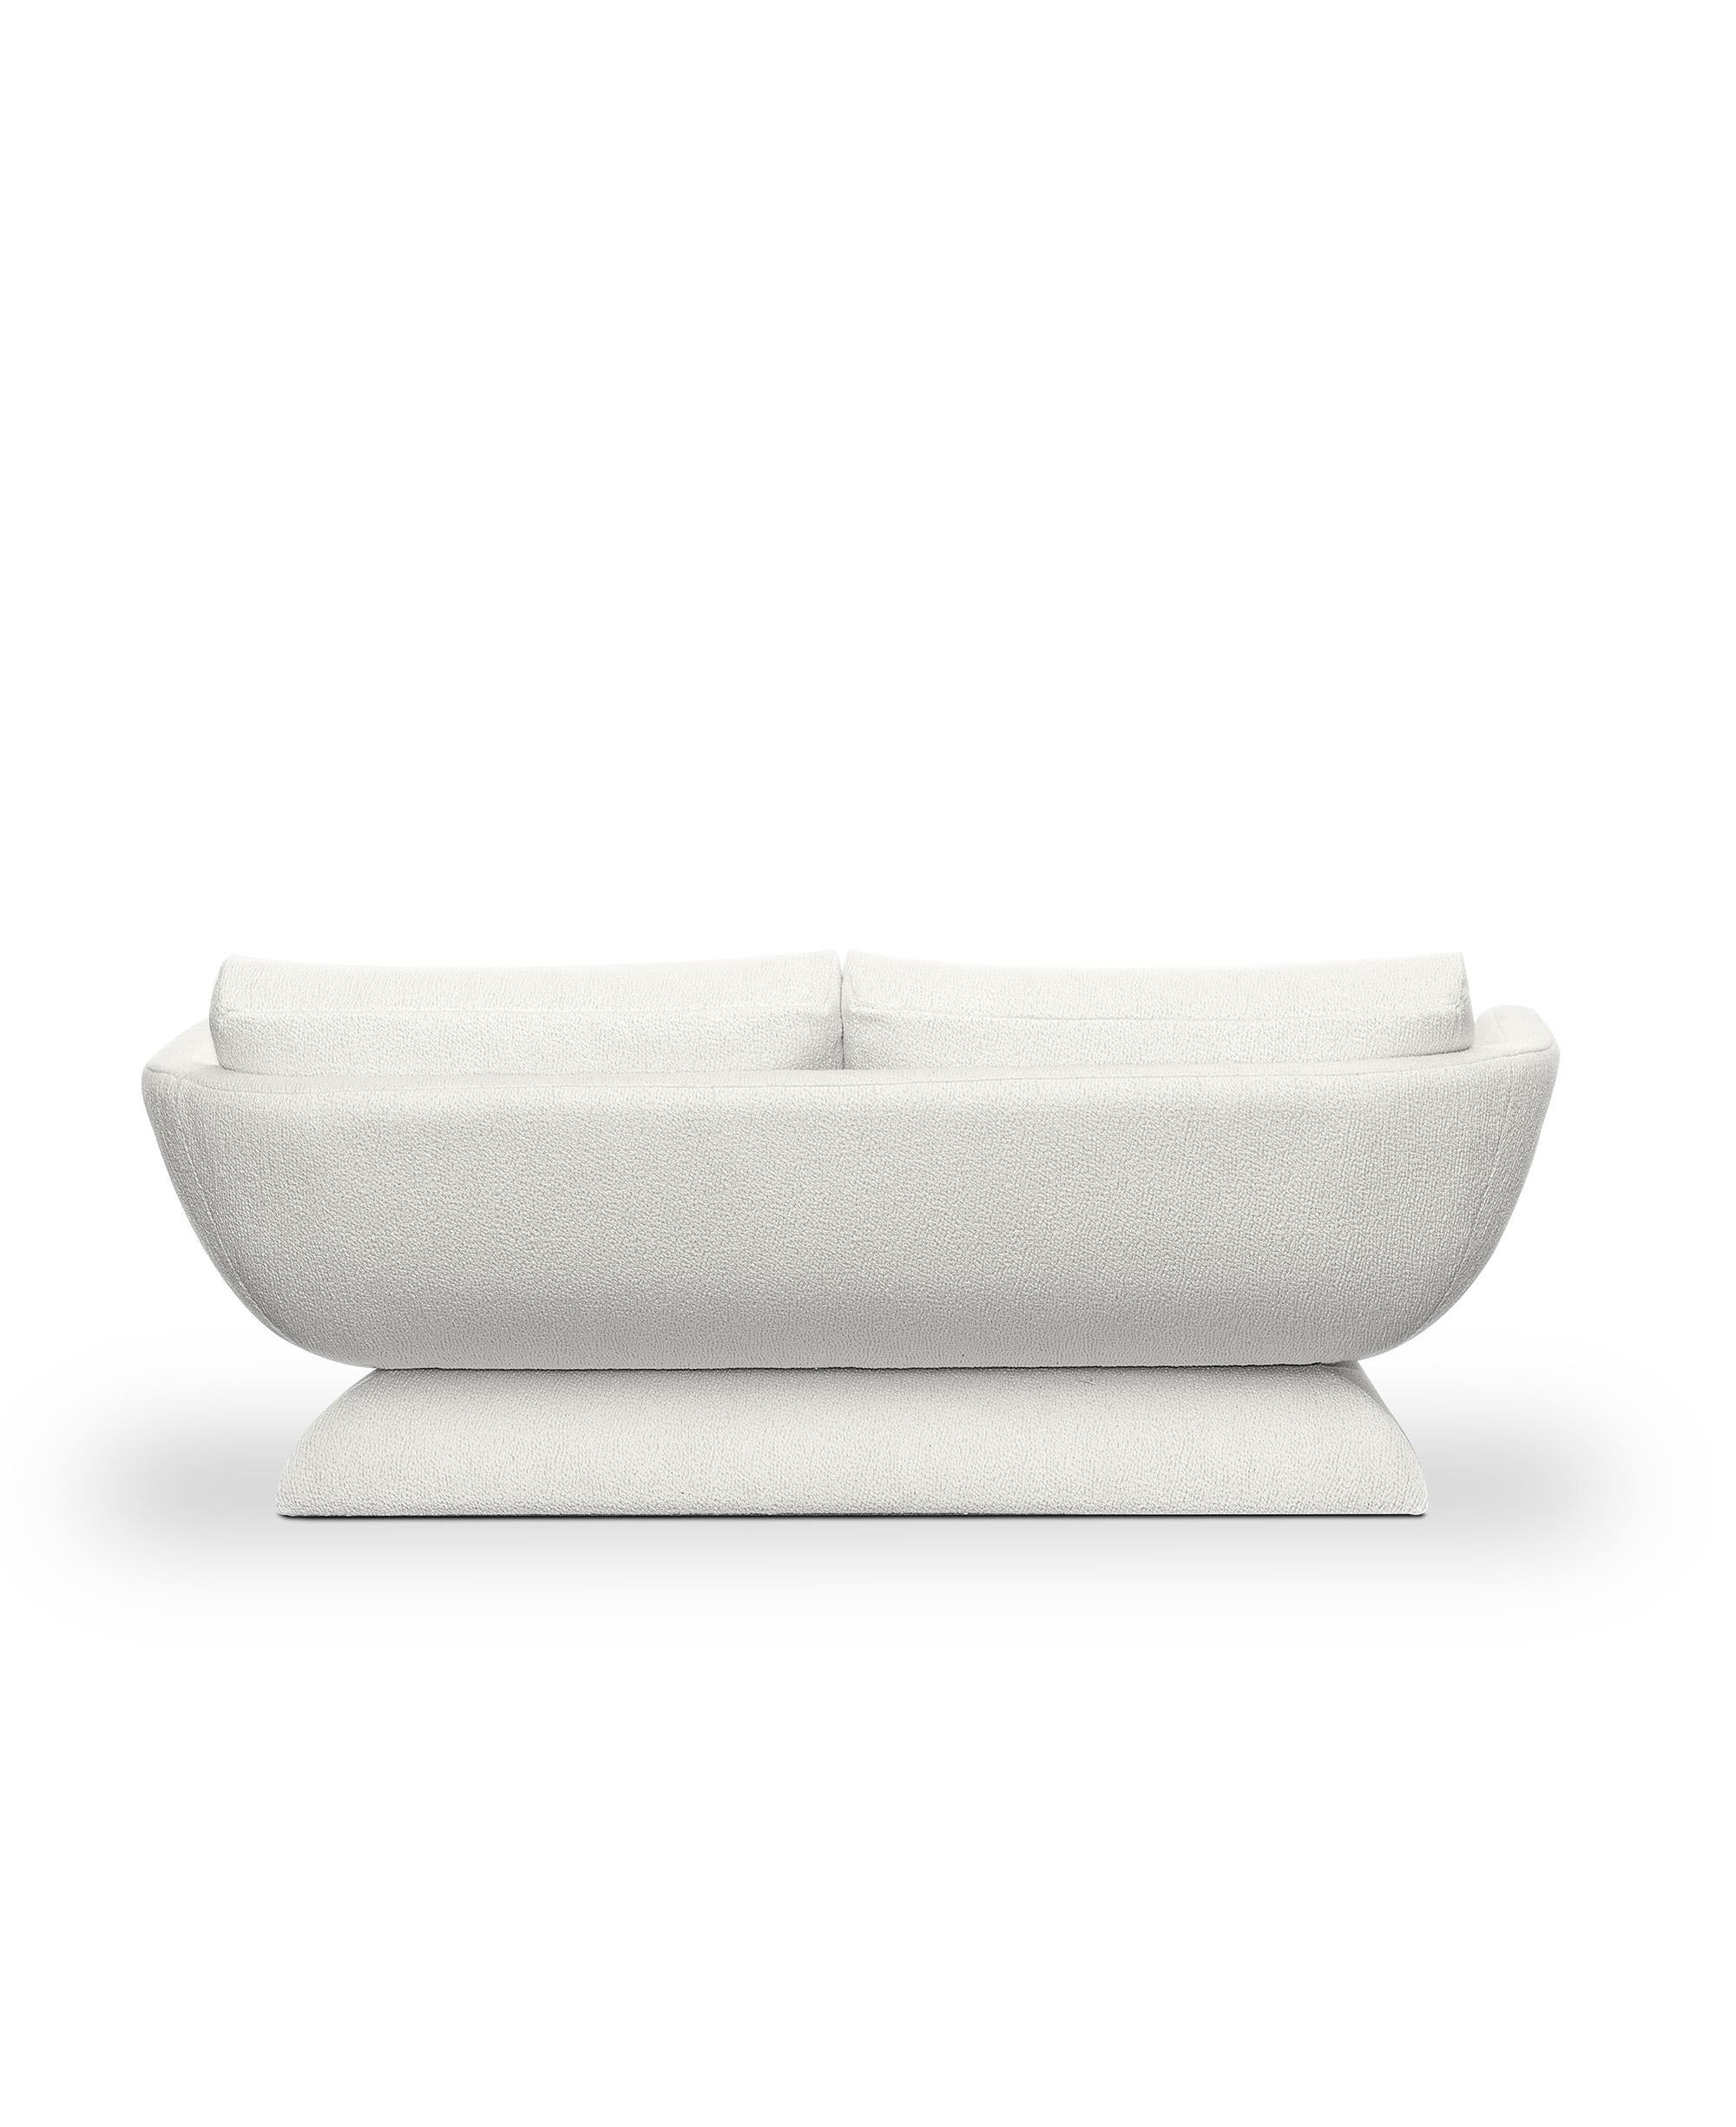 Woodwork Oscar Sofa, Handcrafted in Portugal by Duistt